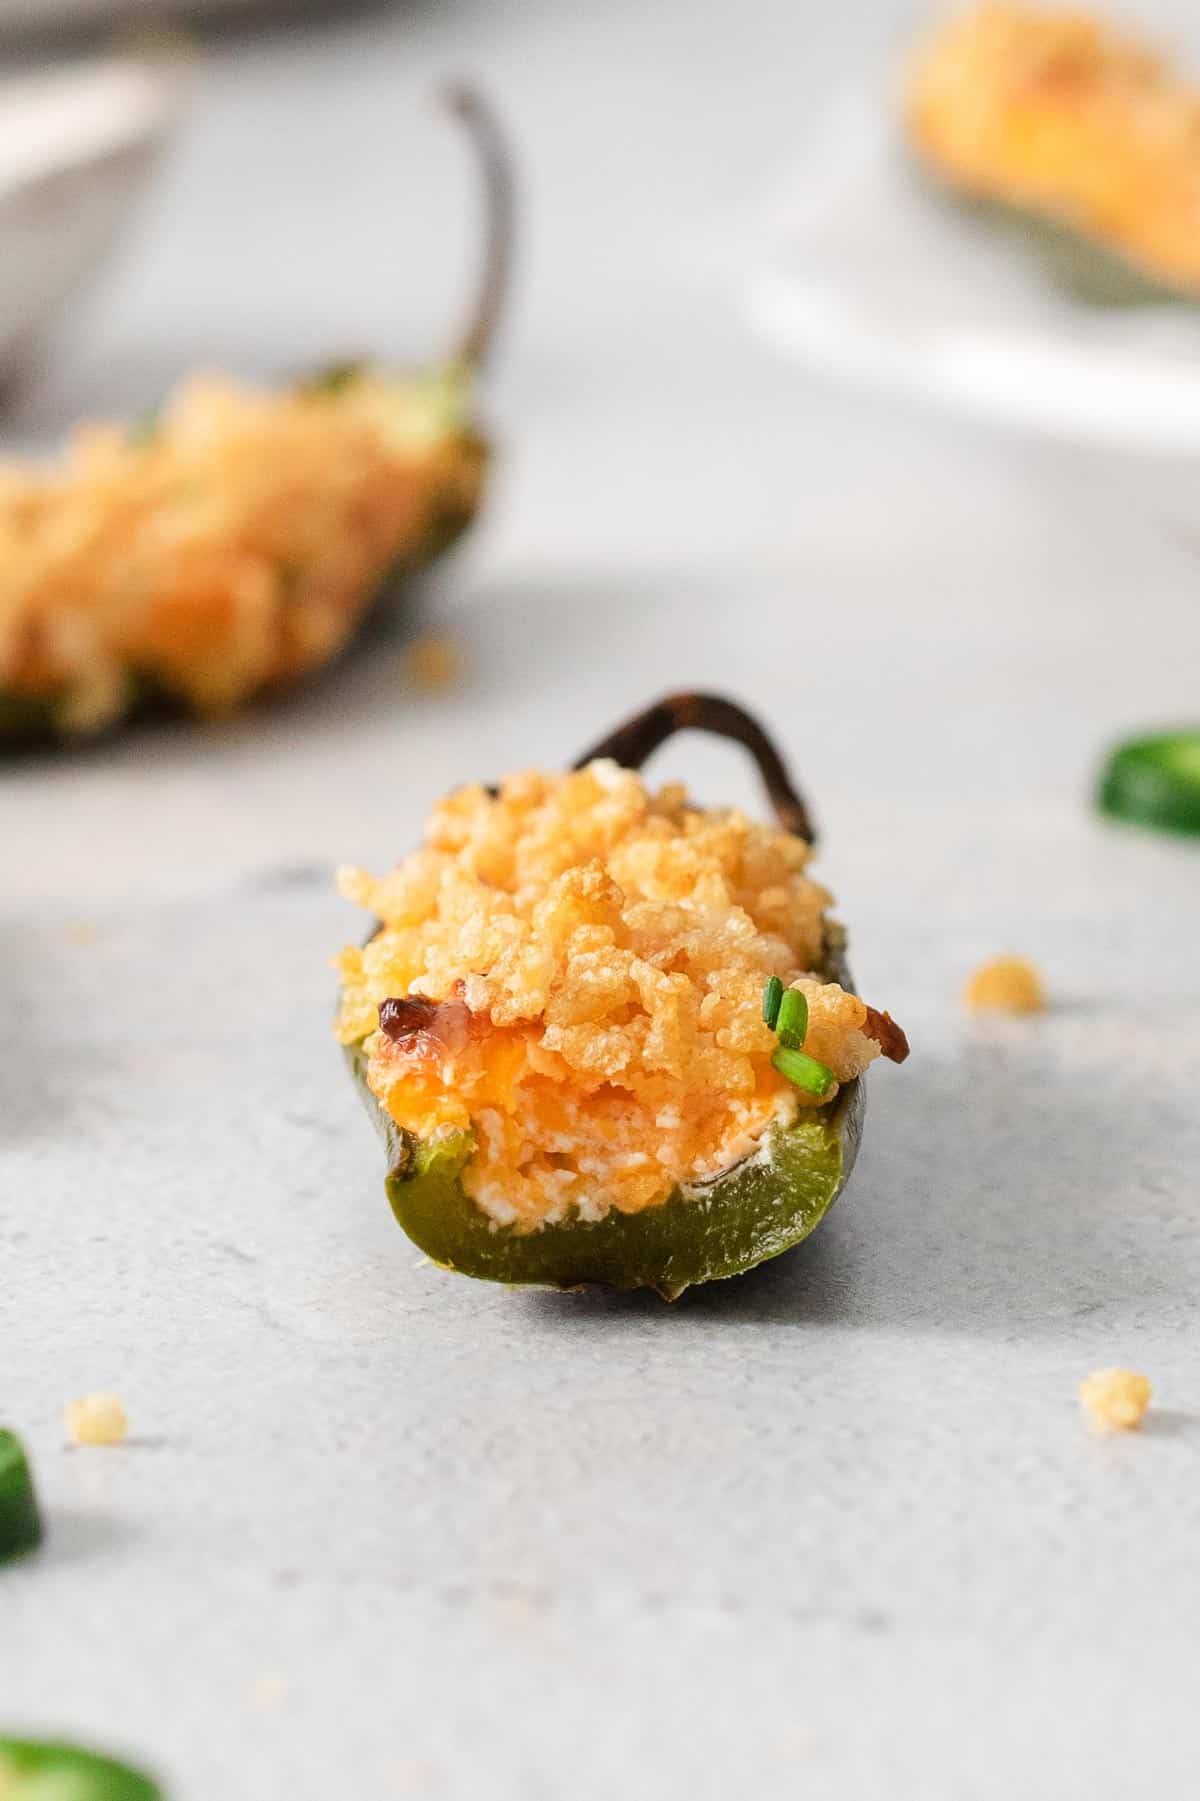 A jalapeno popper with a bite taken out of it